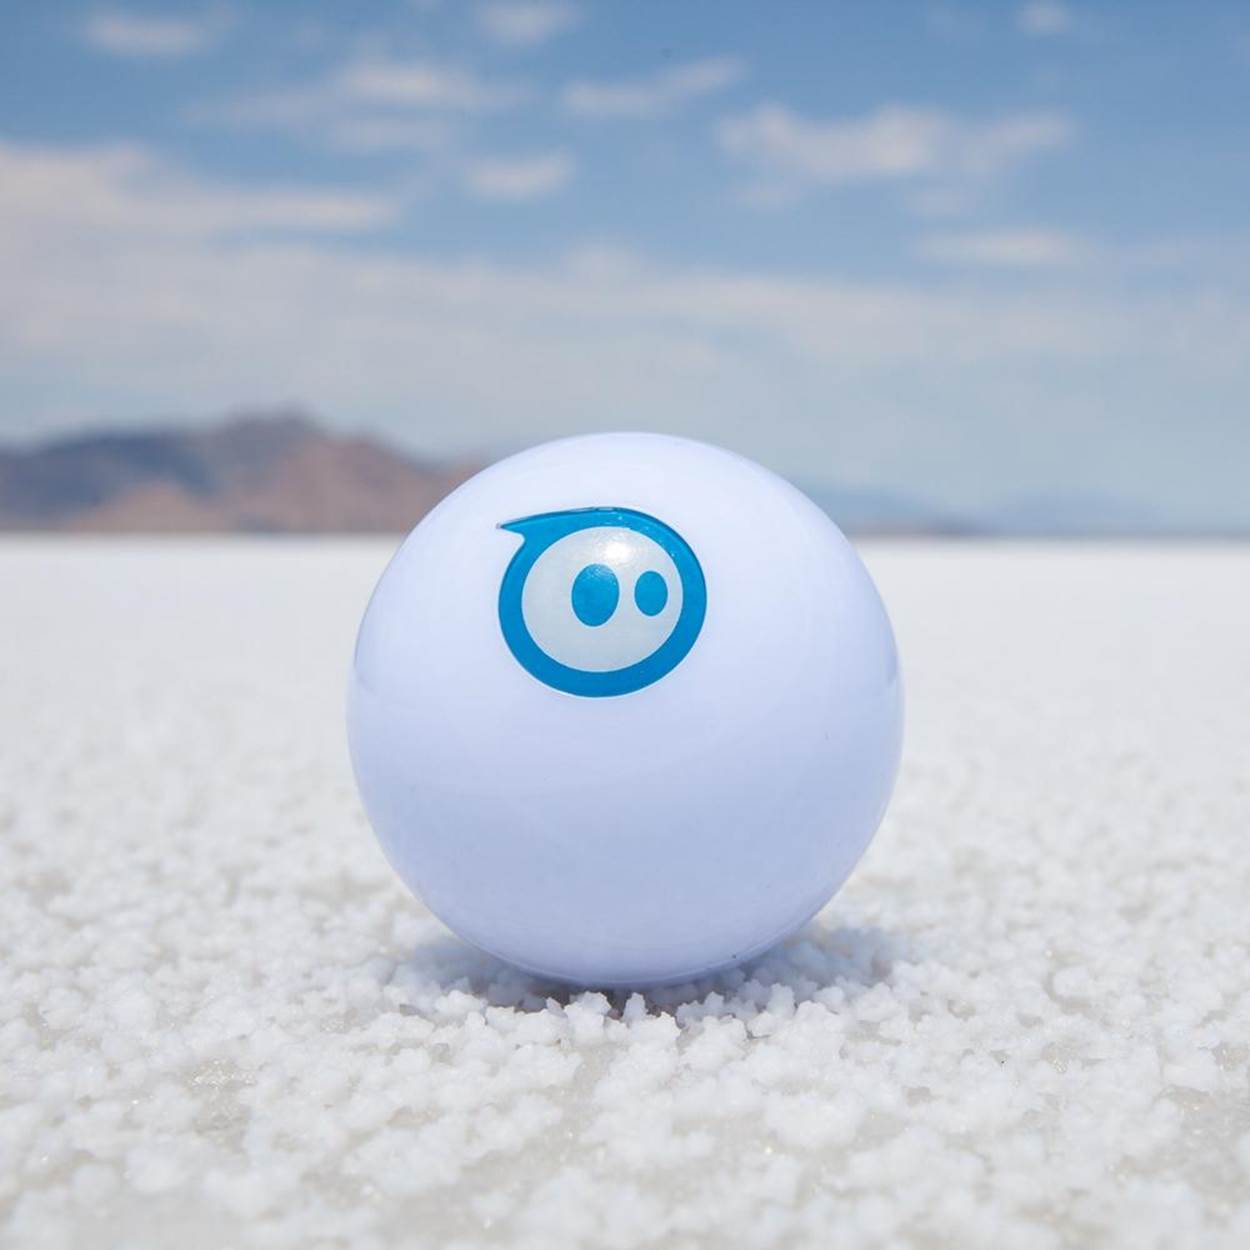 Sphero is a robotic ball that can be programmed to jump or roll with a smartphone. Credit: Orbotix.